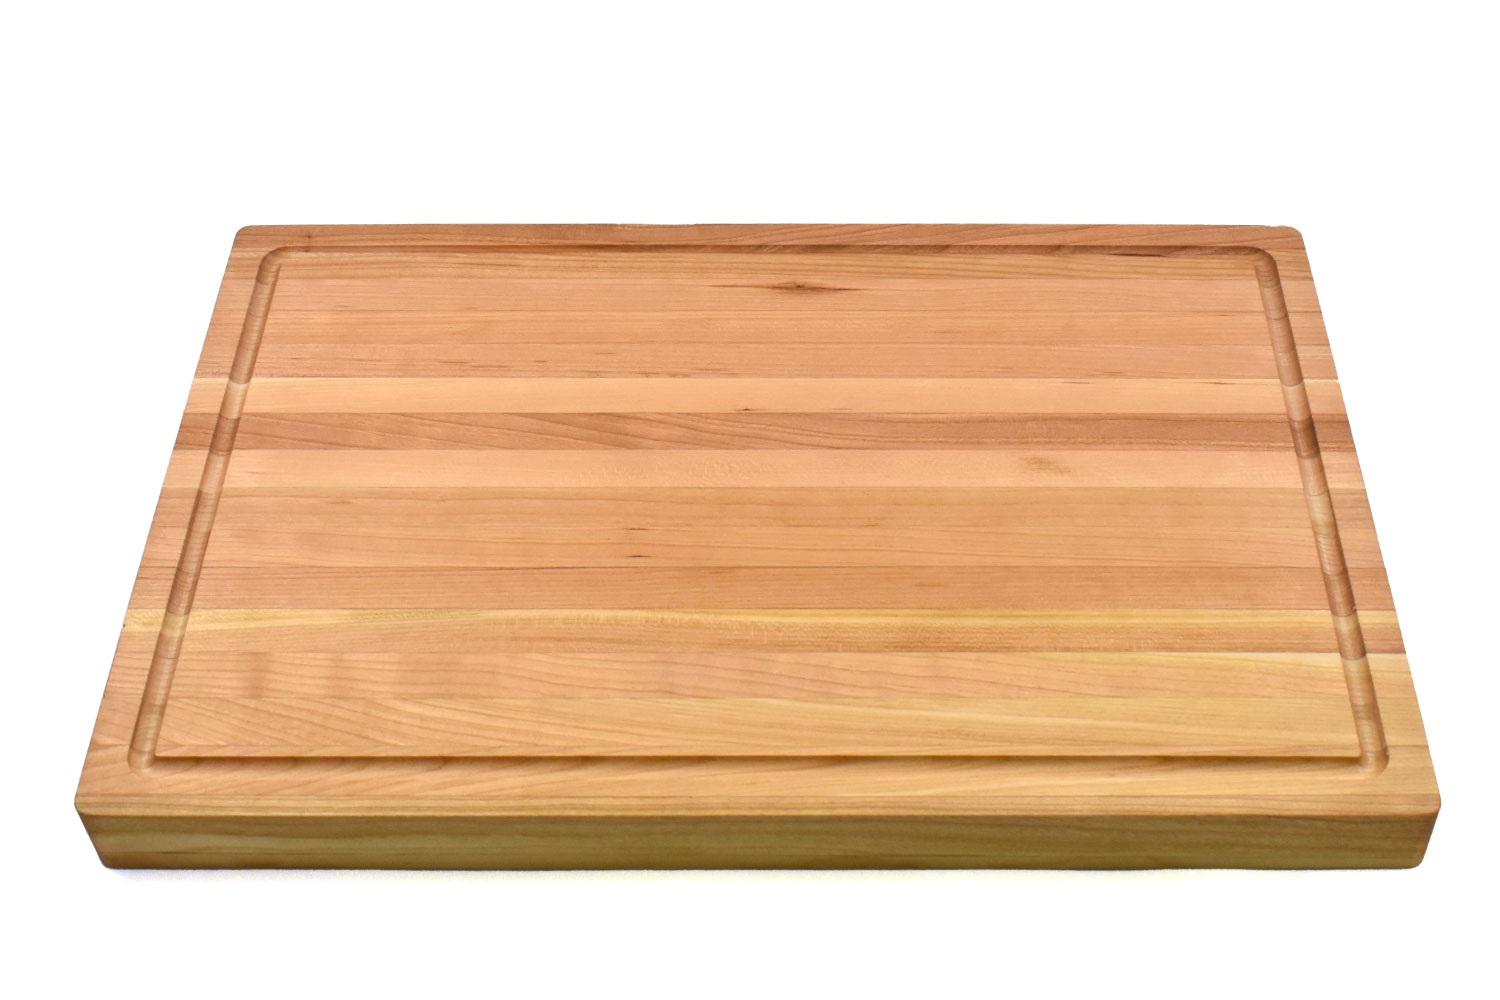 1 1/4 INCH BUTCHER BLOCK WITH JUICE GROOVE